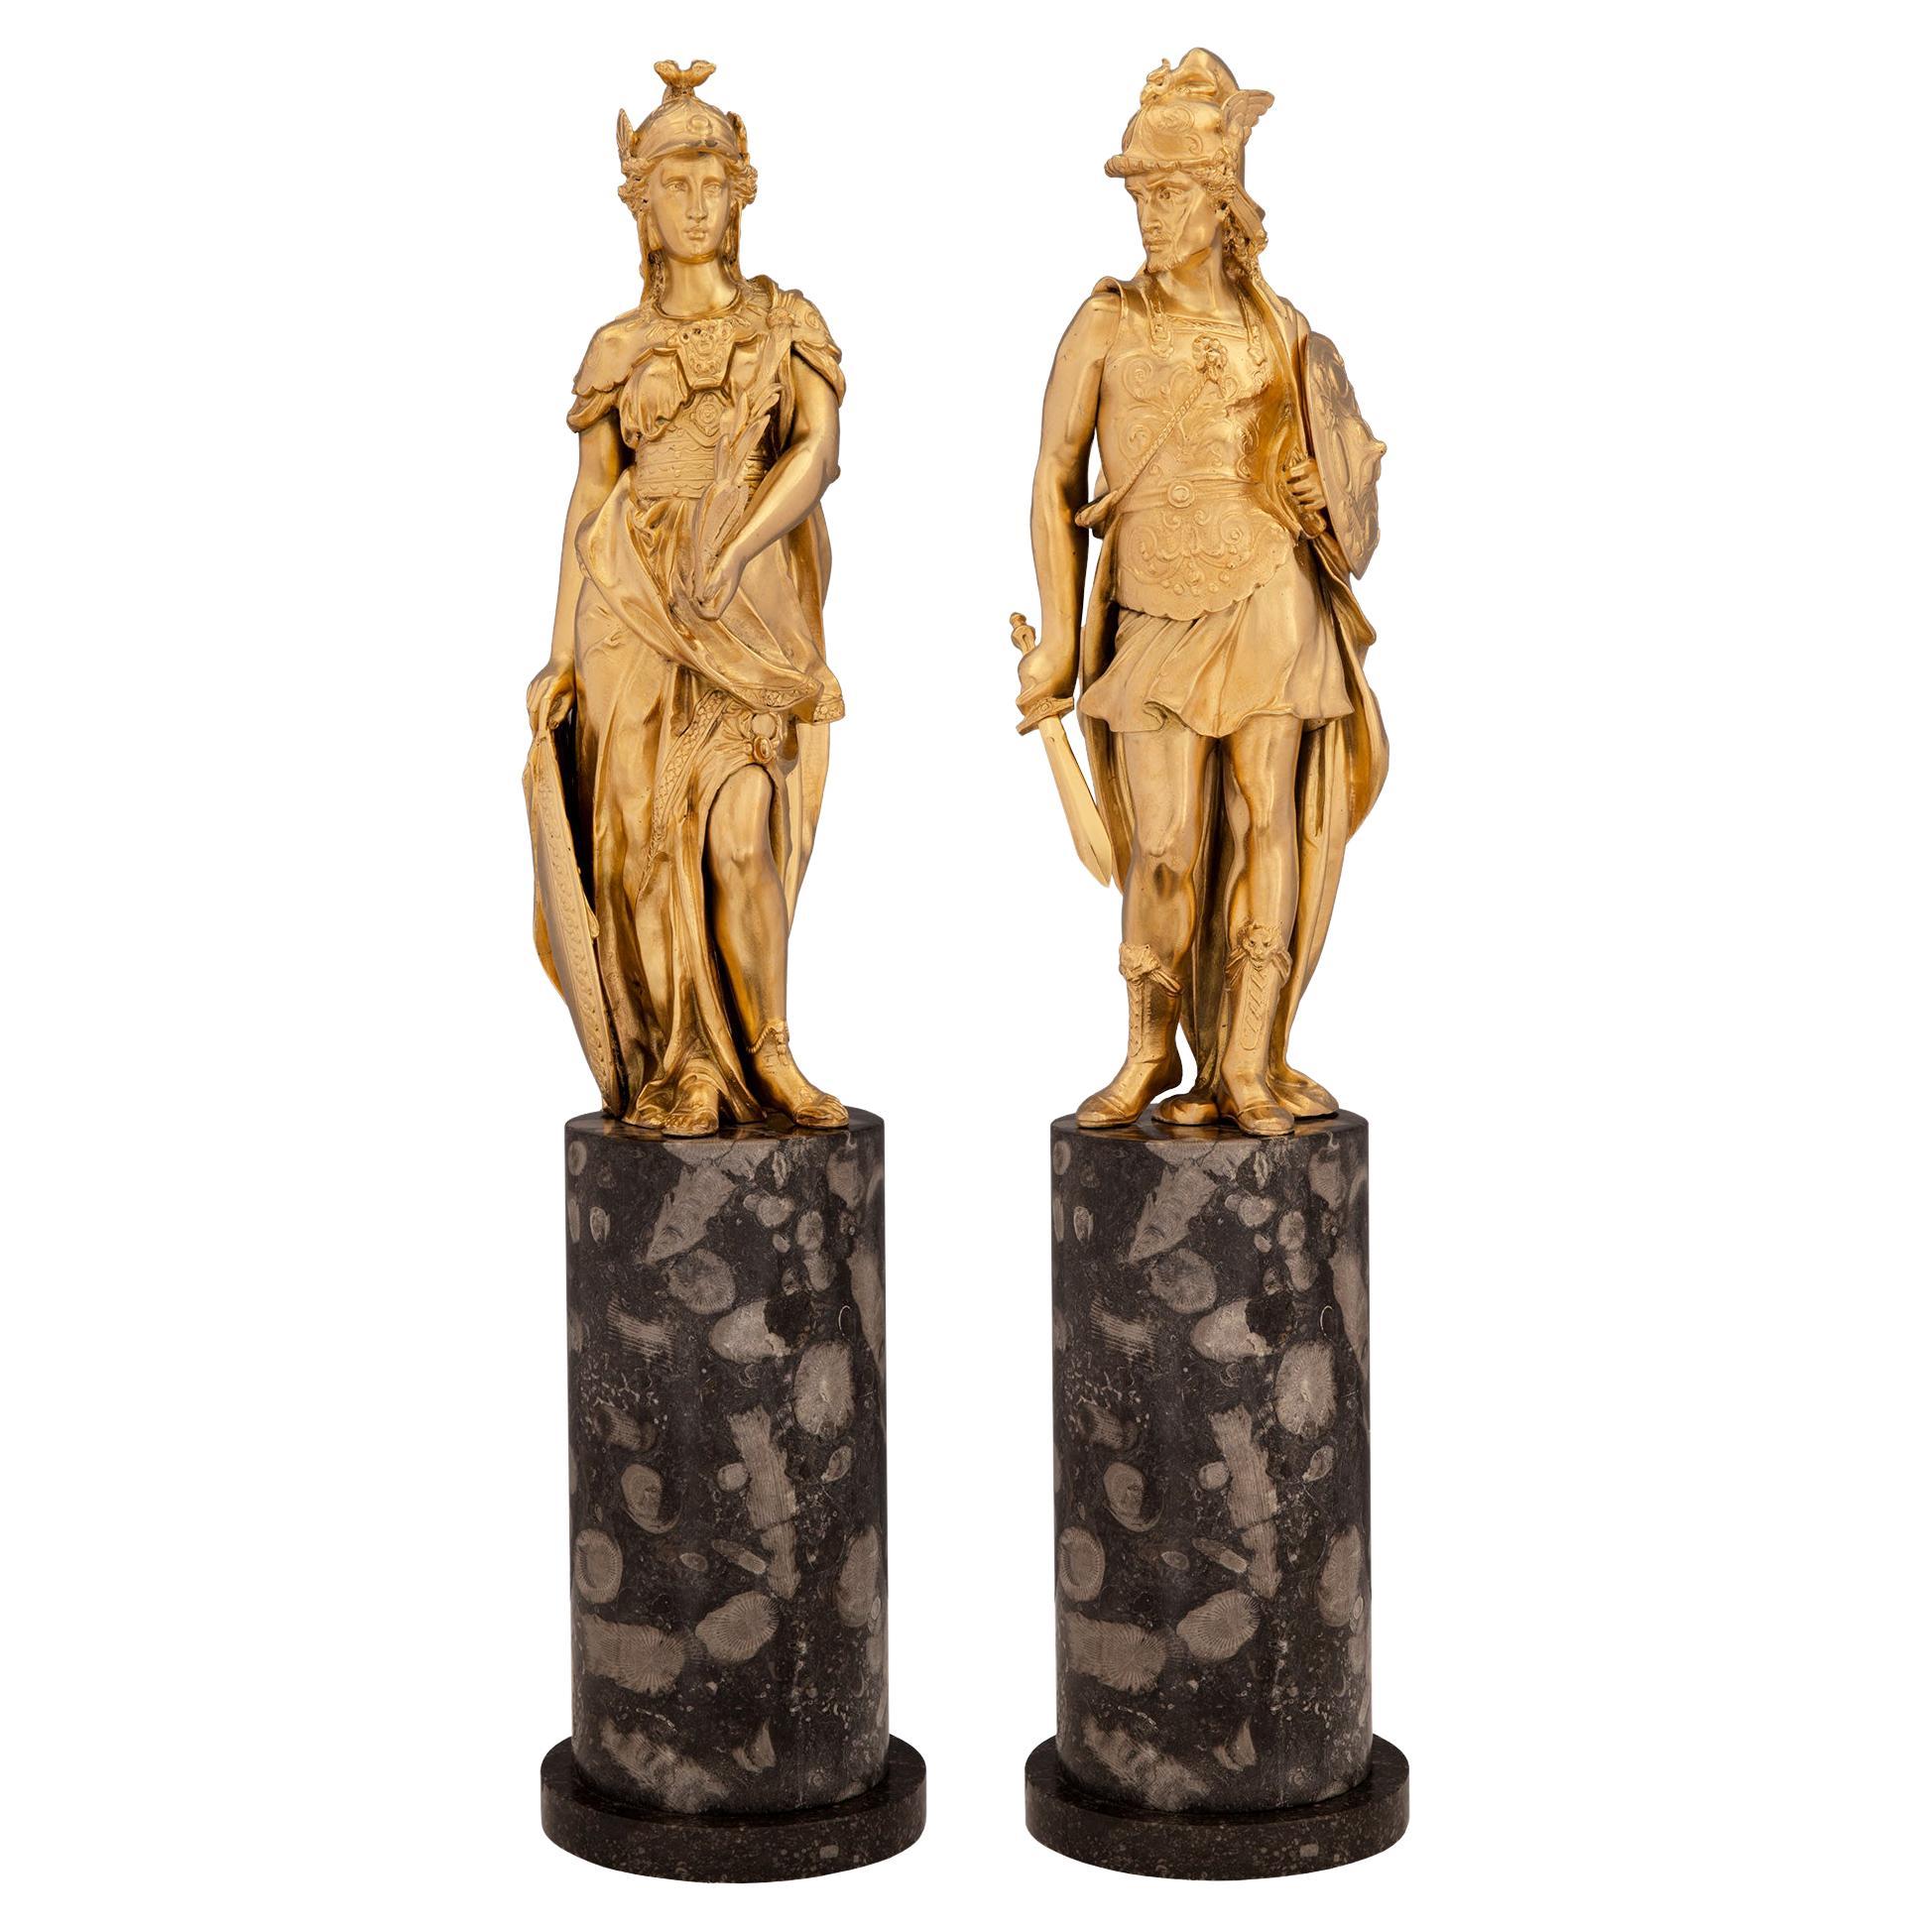 Pair of French 19th Century Neoclassical Style Ormolu and Marble Statues